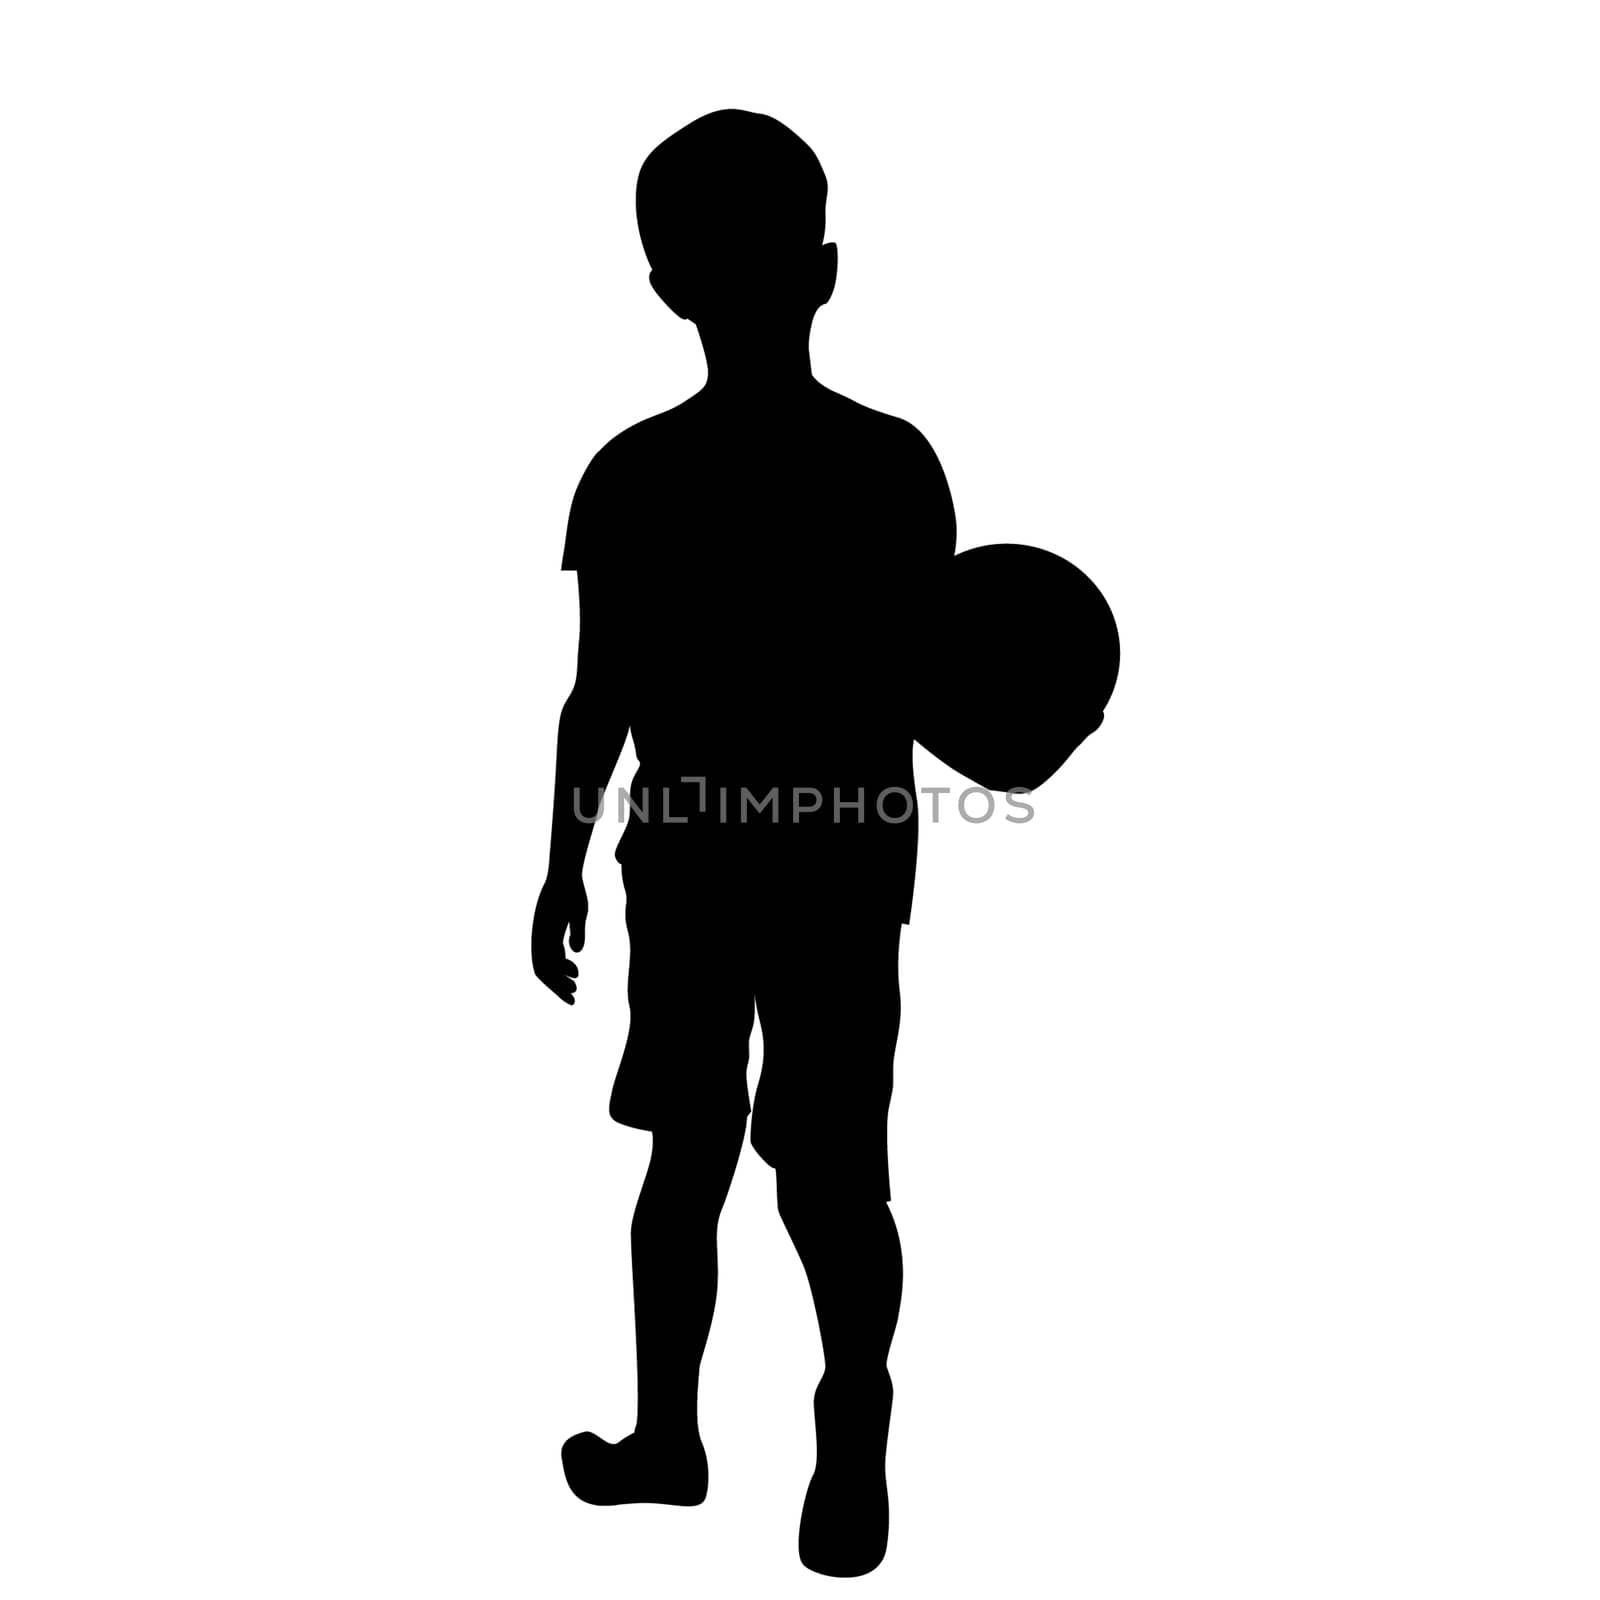 Silhouette of boy holding a ball